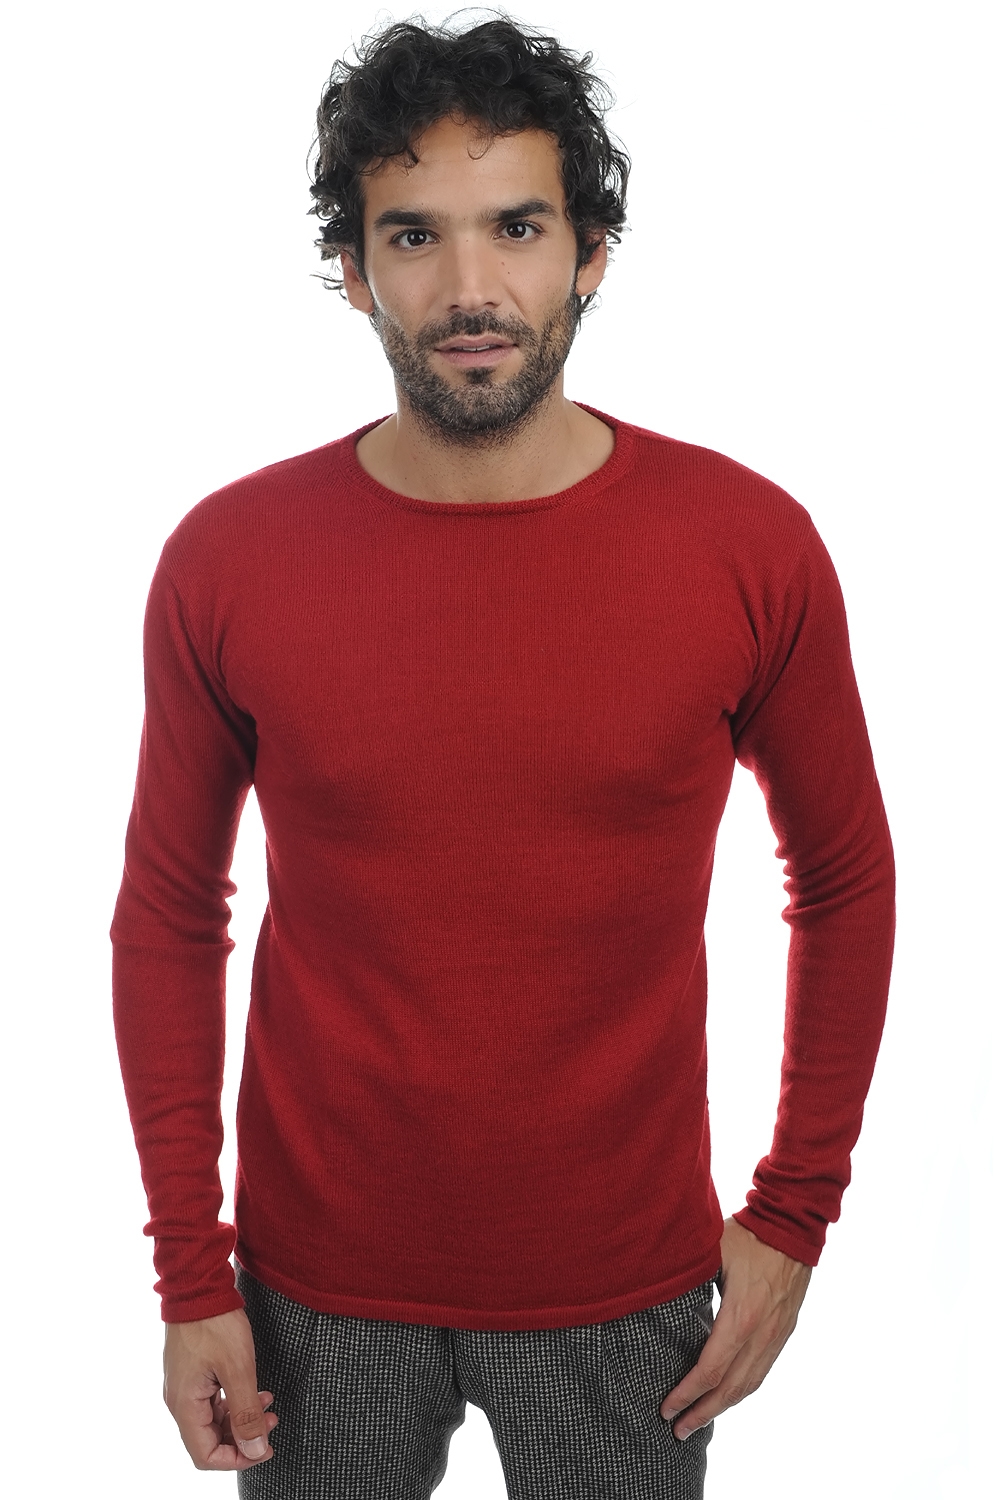 Baby Alpaga pull homme christian rouge xl